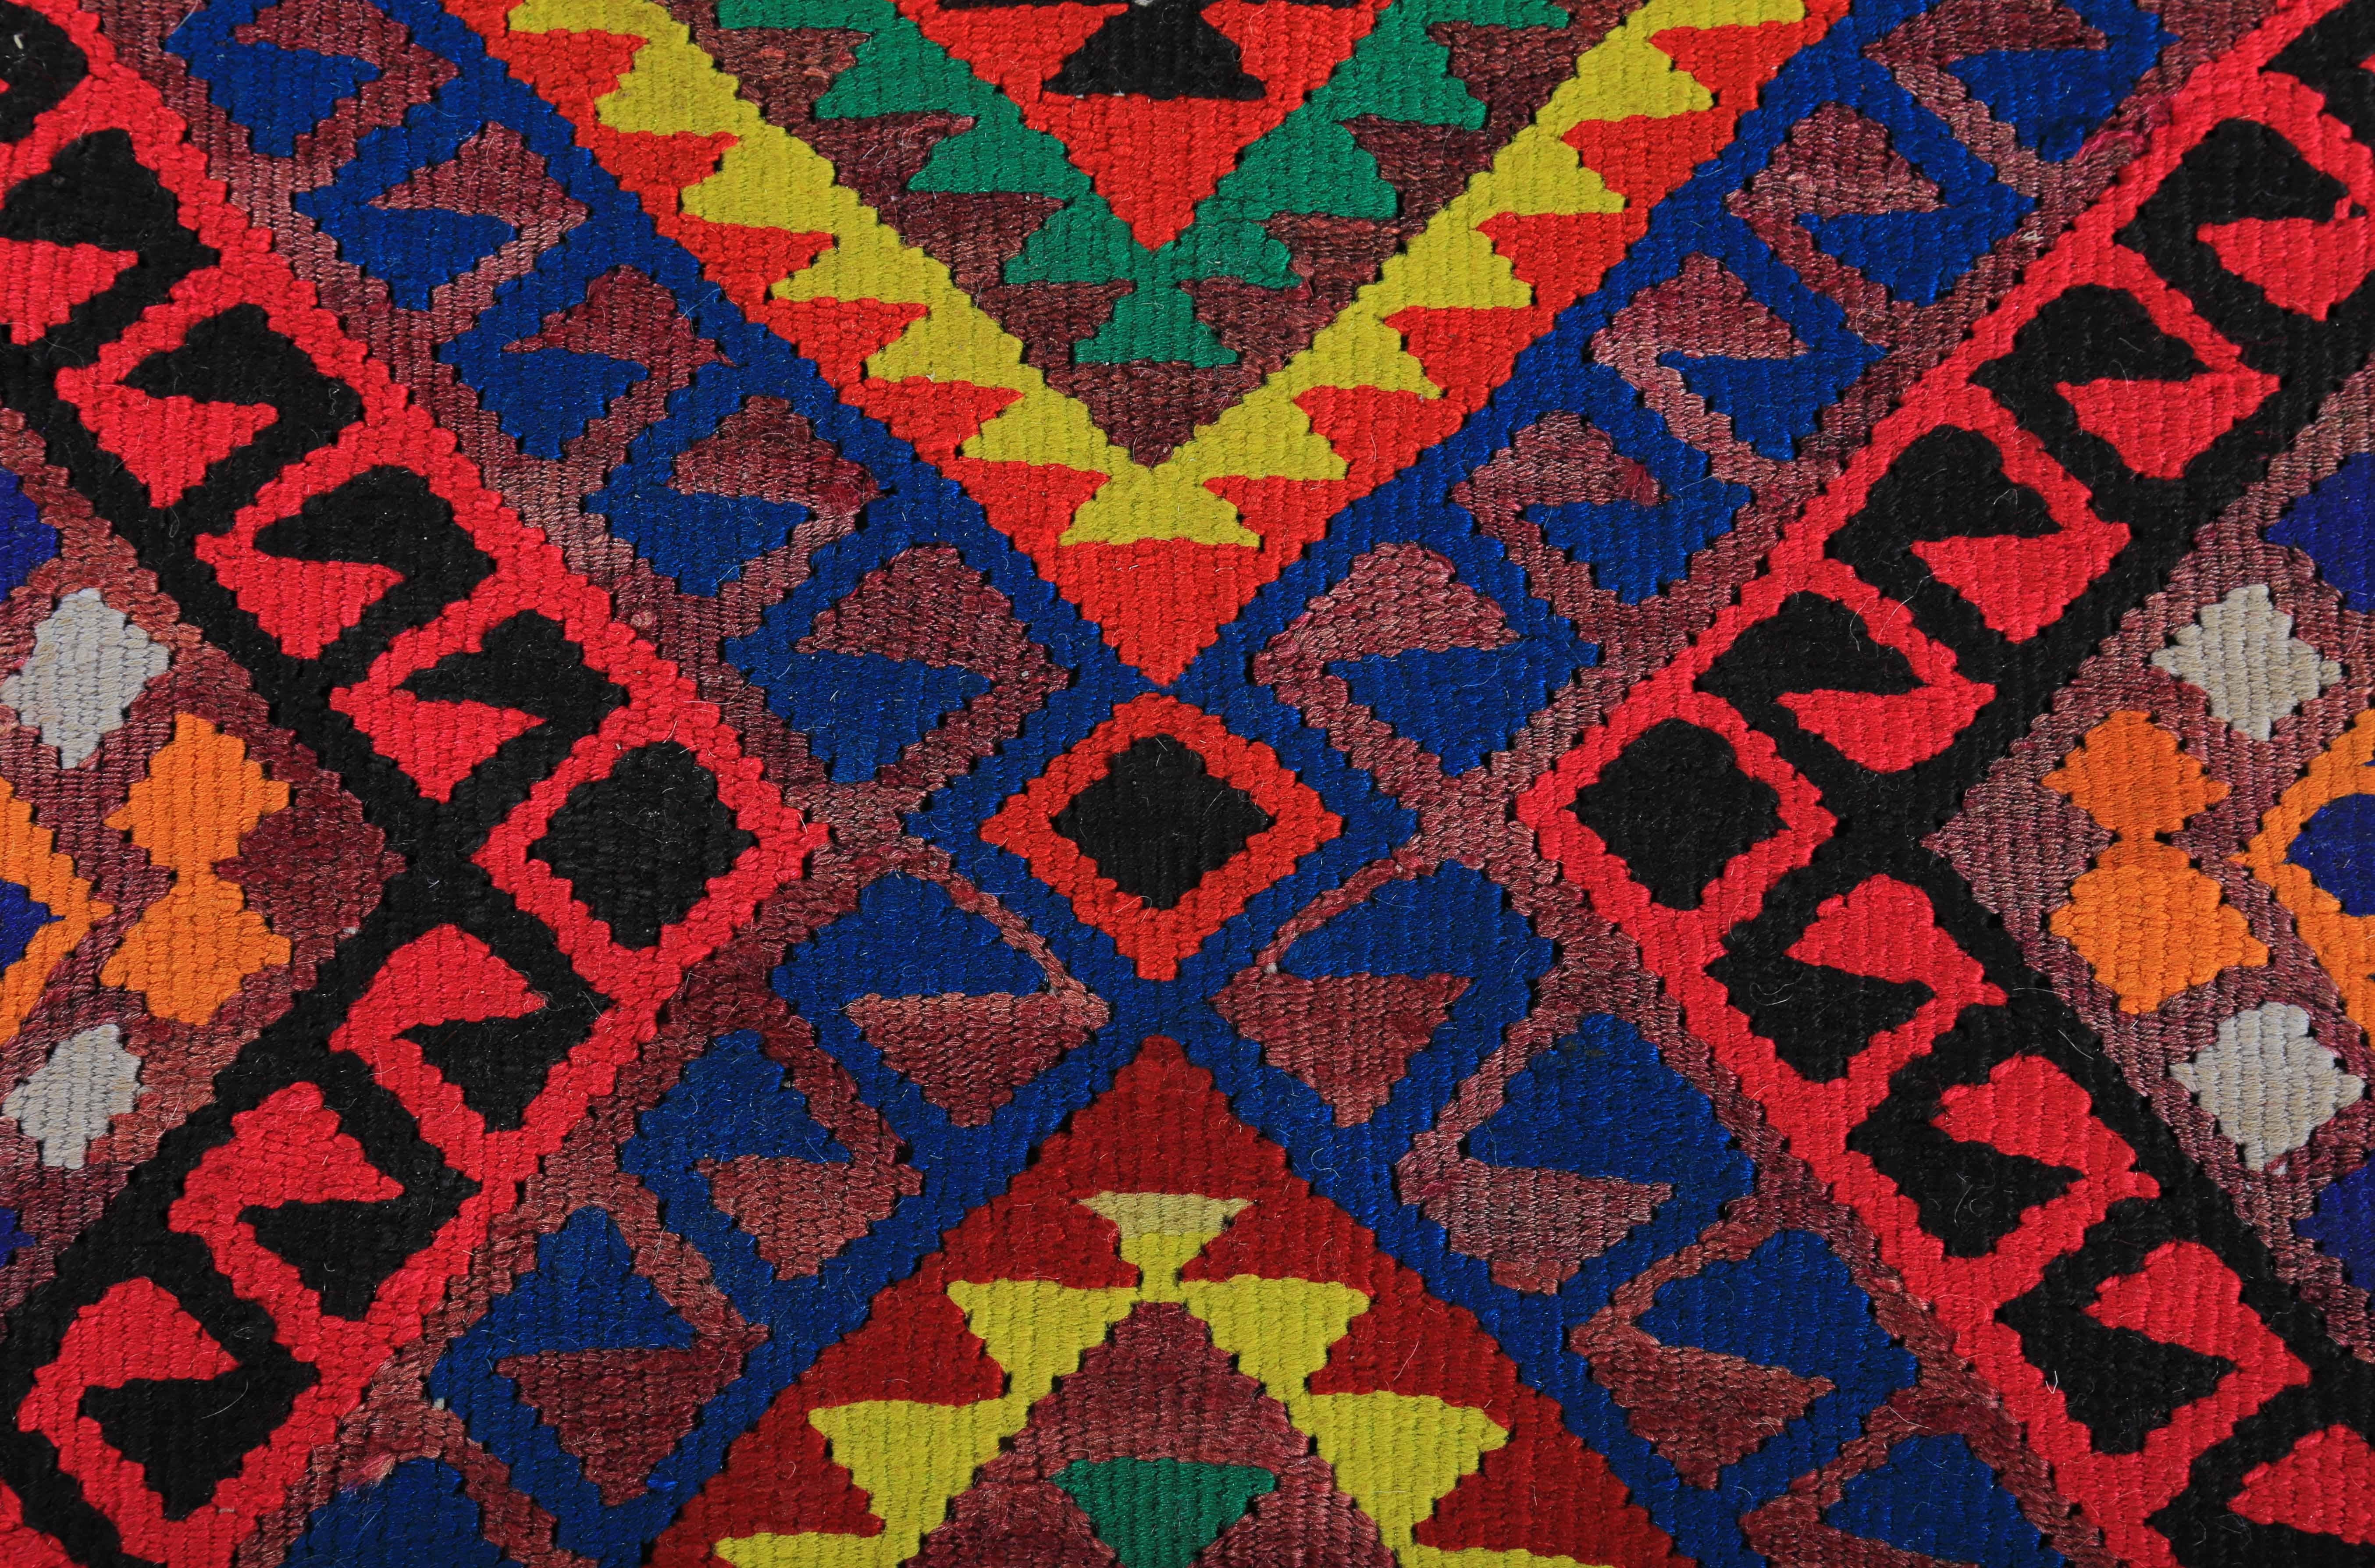 Hand-Woven Modern Turkish Kilim Rug with Bright Colored Diamond Details For Sale